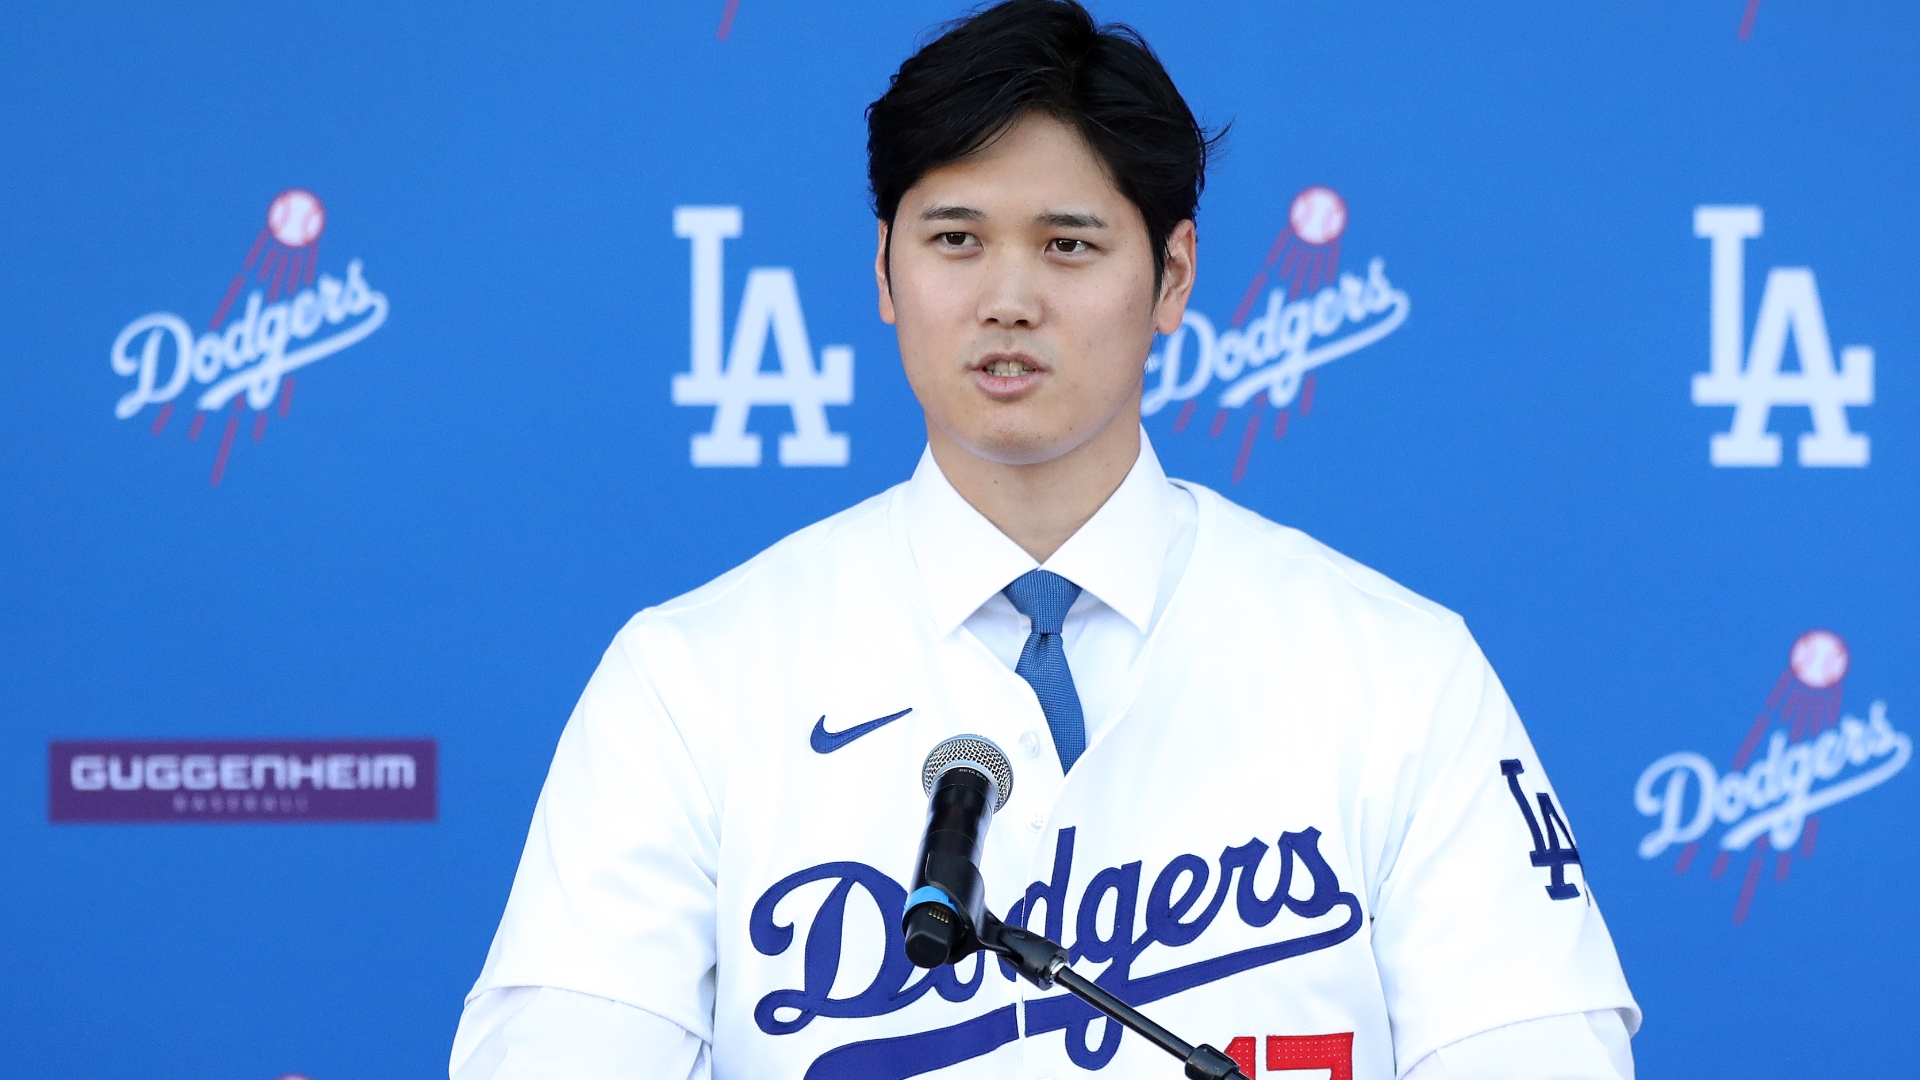 Shohei Ohtani officially introduced as member of the Dodgers - Stream ...